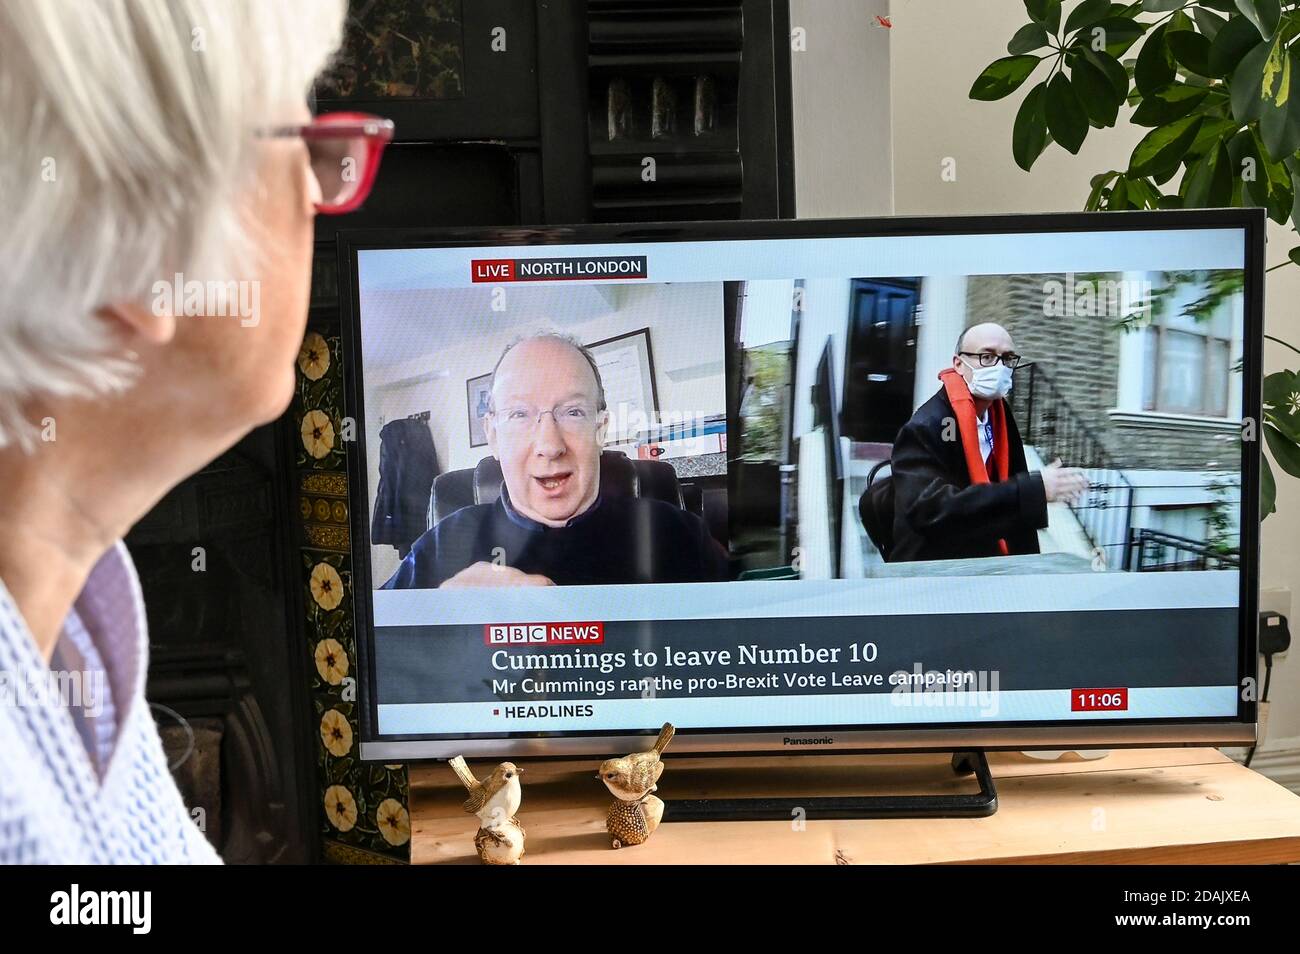 Televised report of Dominic Cummings resigning as advisor to Boris Johnson with comment from Daniel Finkelstein Times Editor, watched by a viewer. Stock Photo